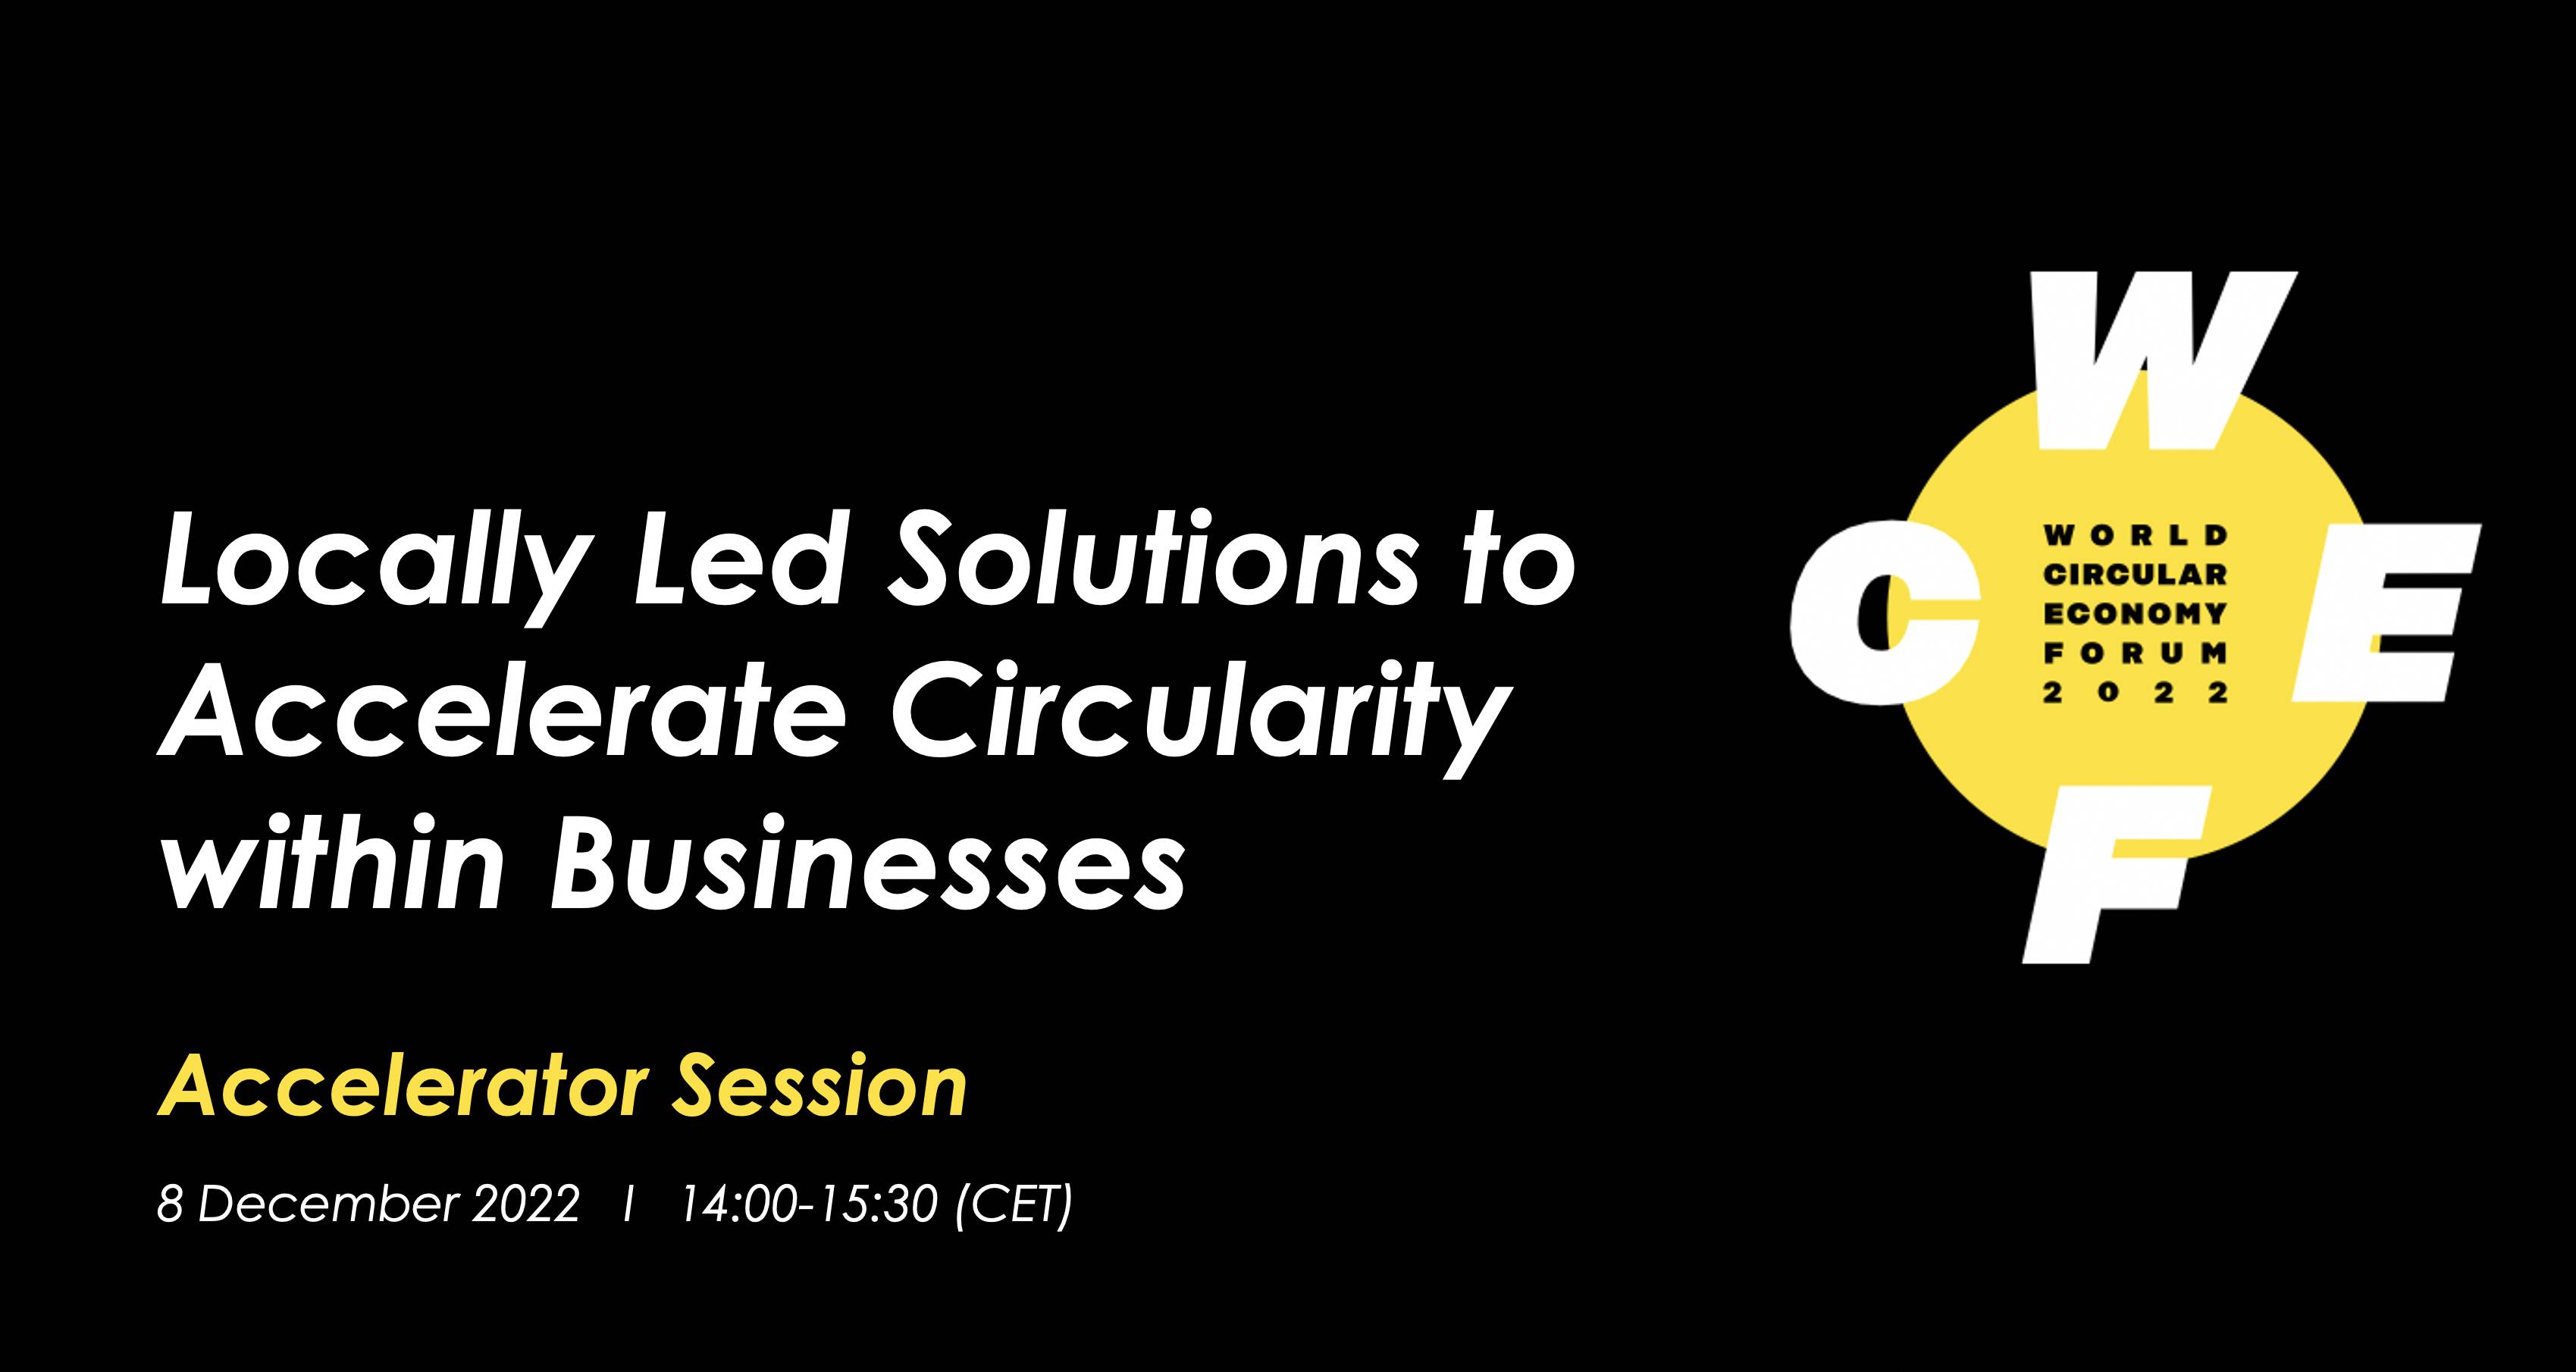 Locally Led Solutions to Accelerate Circularity within Businesses